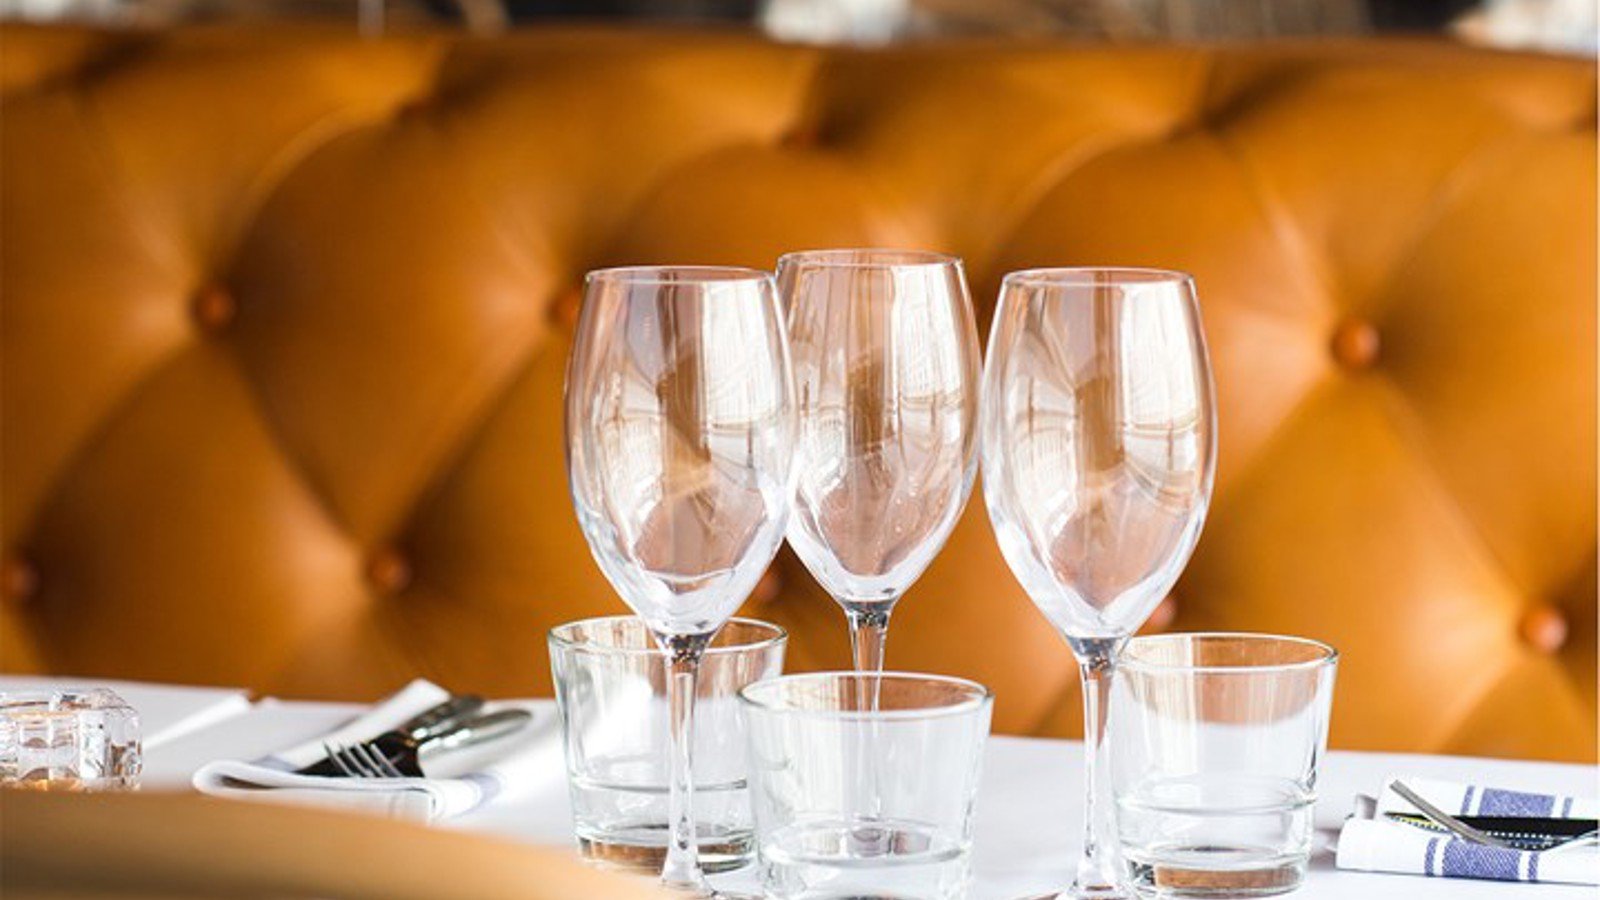 Three wine glasses on a table in front of a brown leather sofa